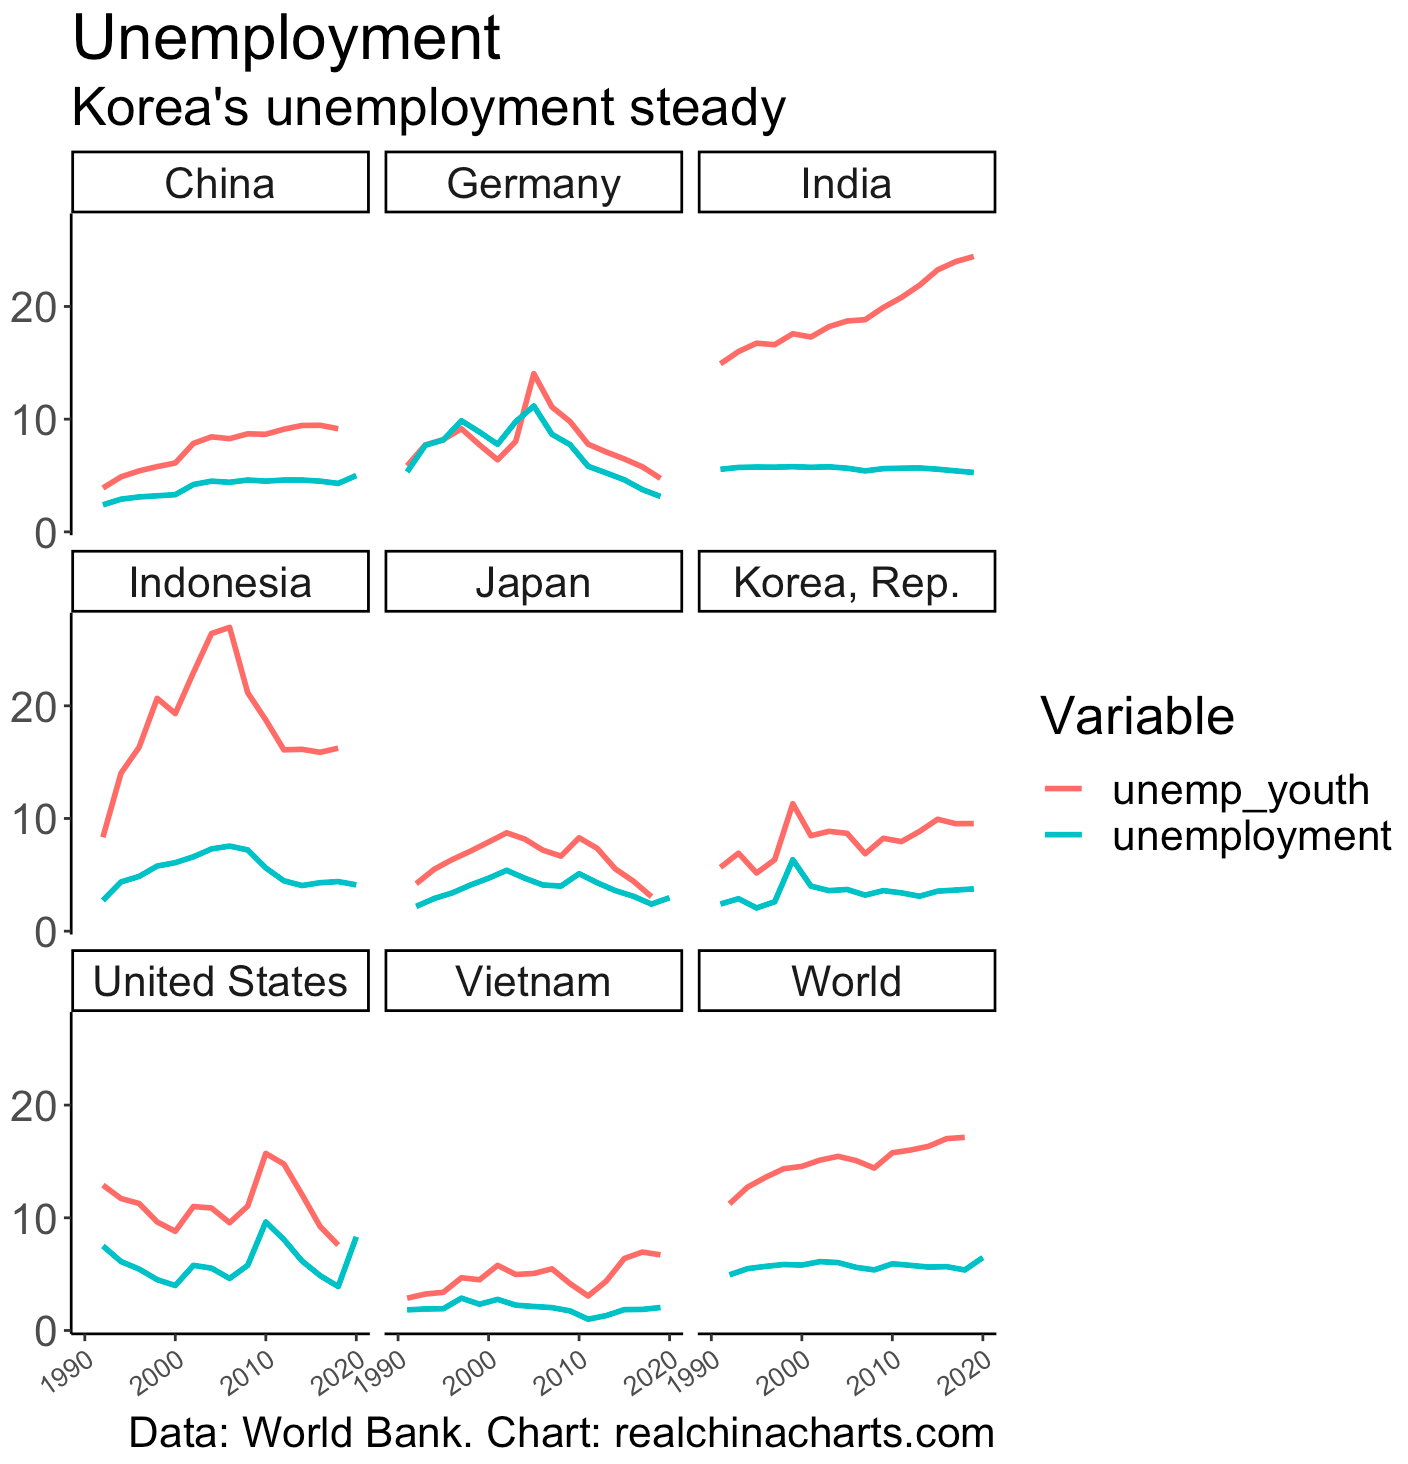 Unemployment comparison across countries, China, South Korea, Germany